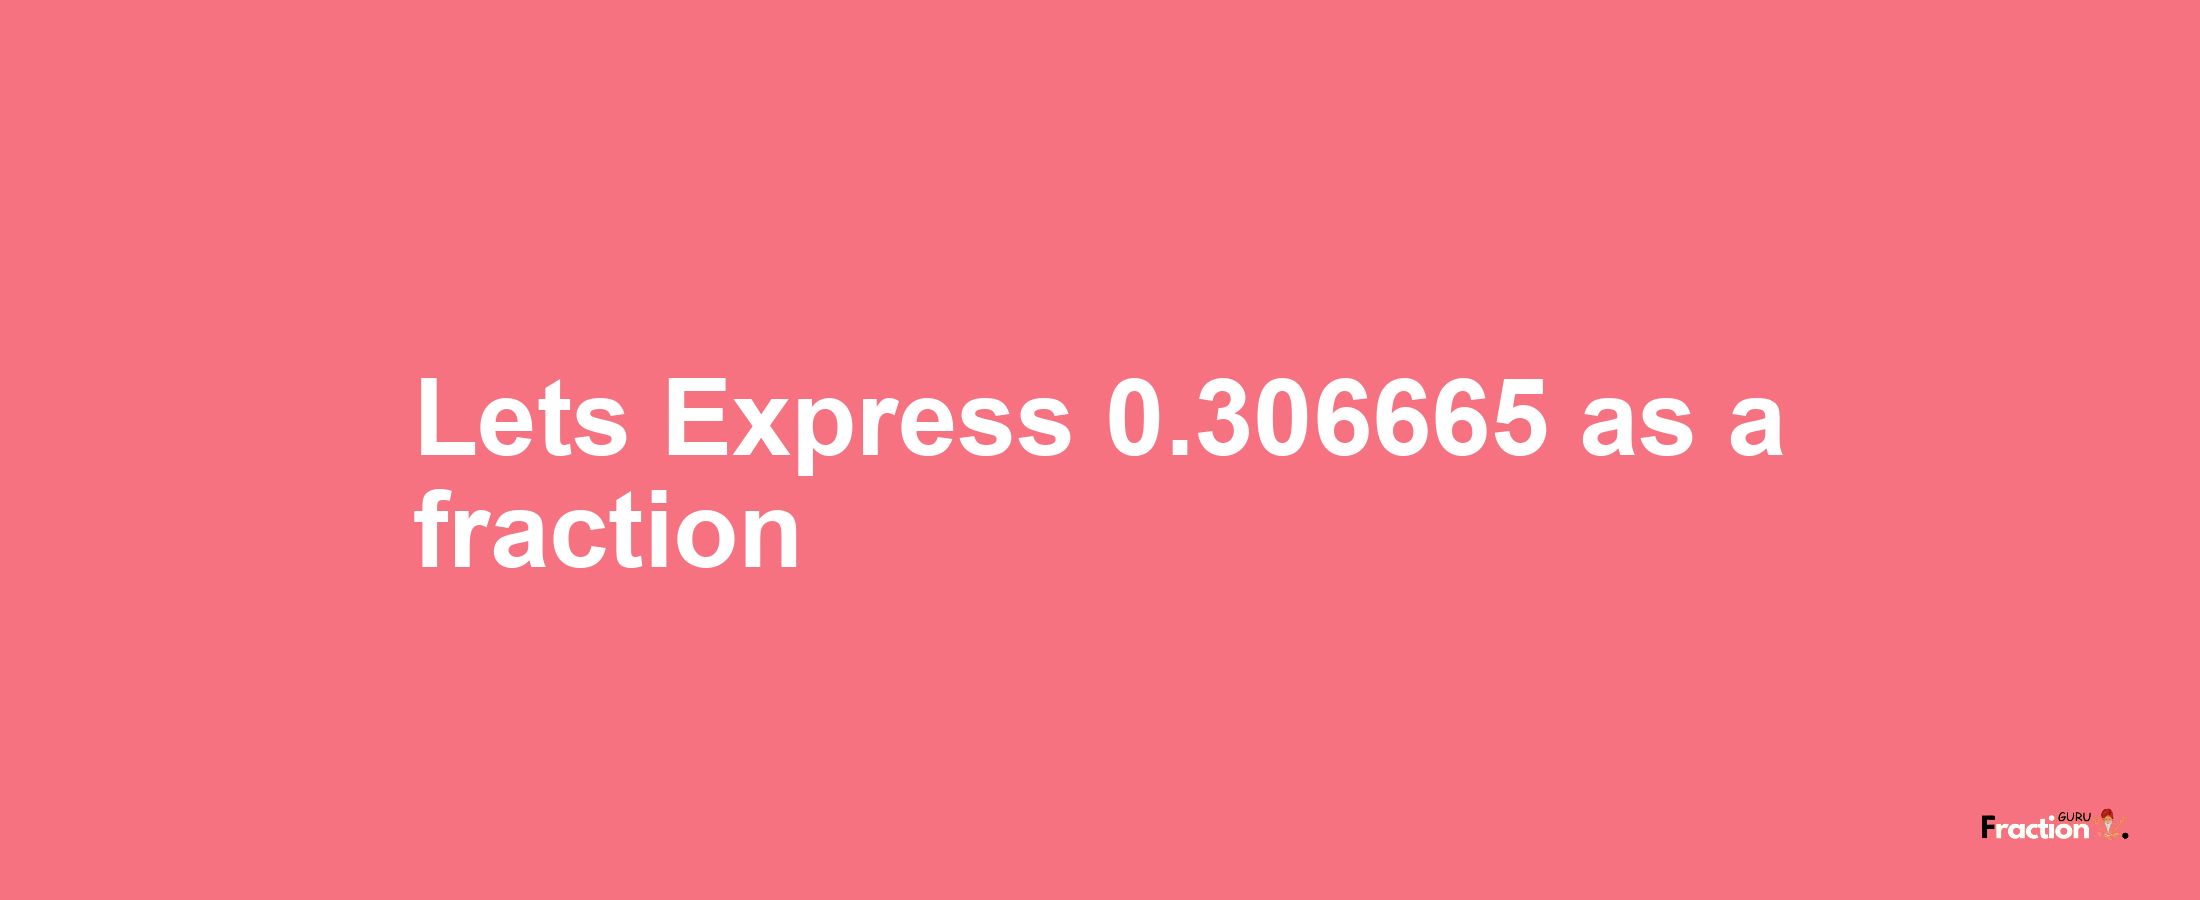 Lets Express 0.306665 as afraction